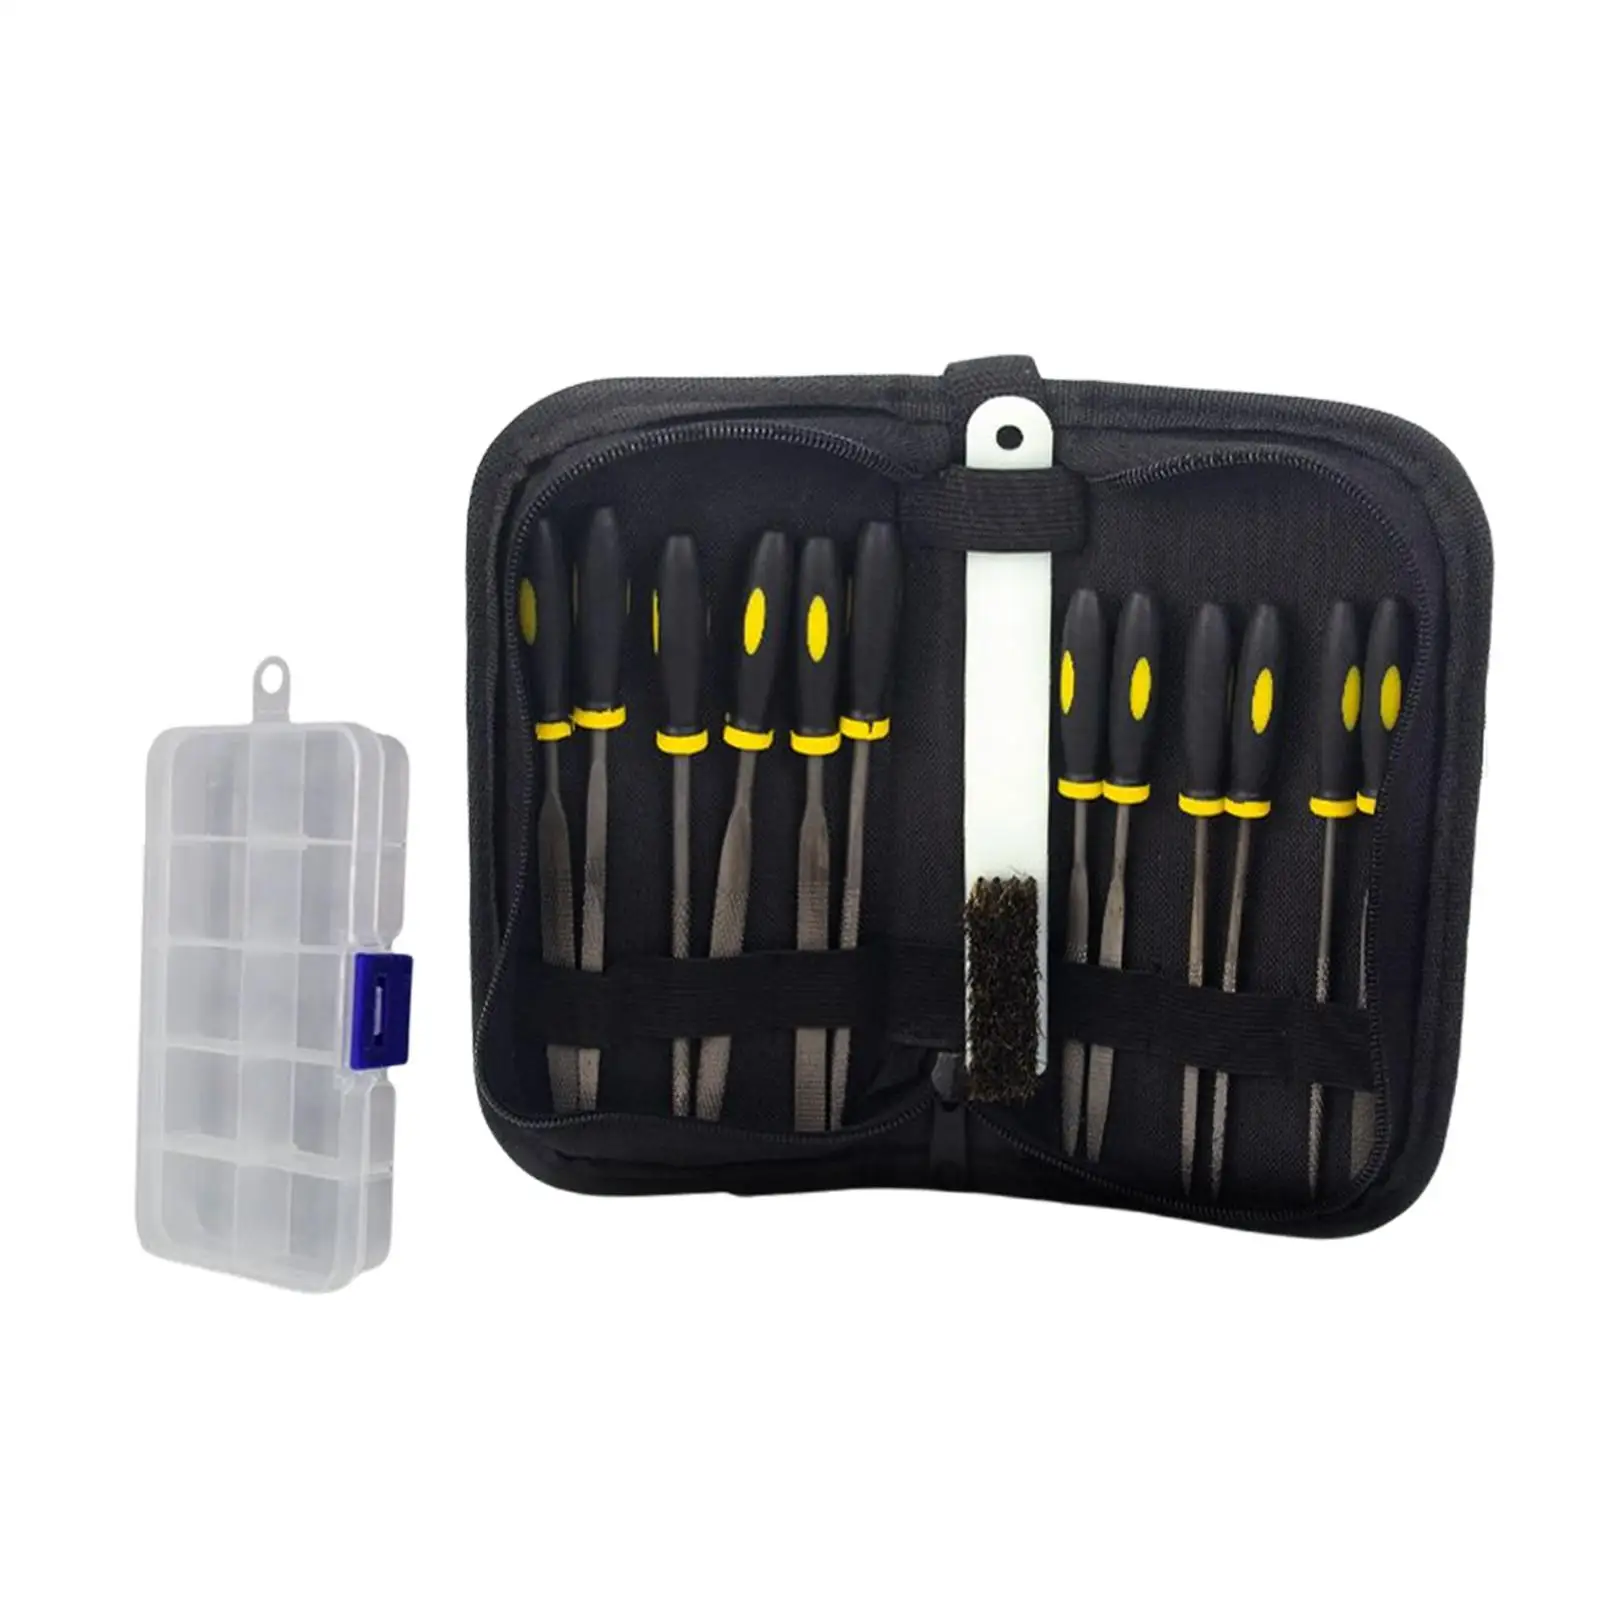 Needle File Set Craft files Tools for Crafts Wood Metalworking Woodworking